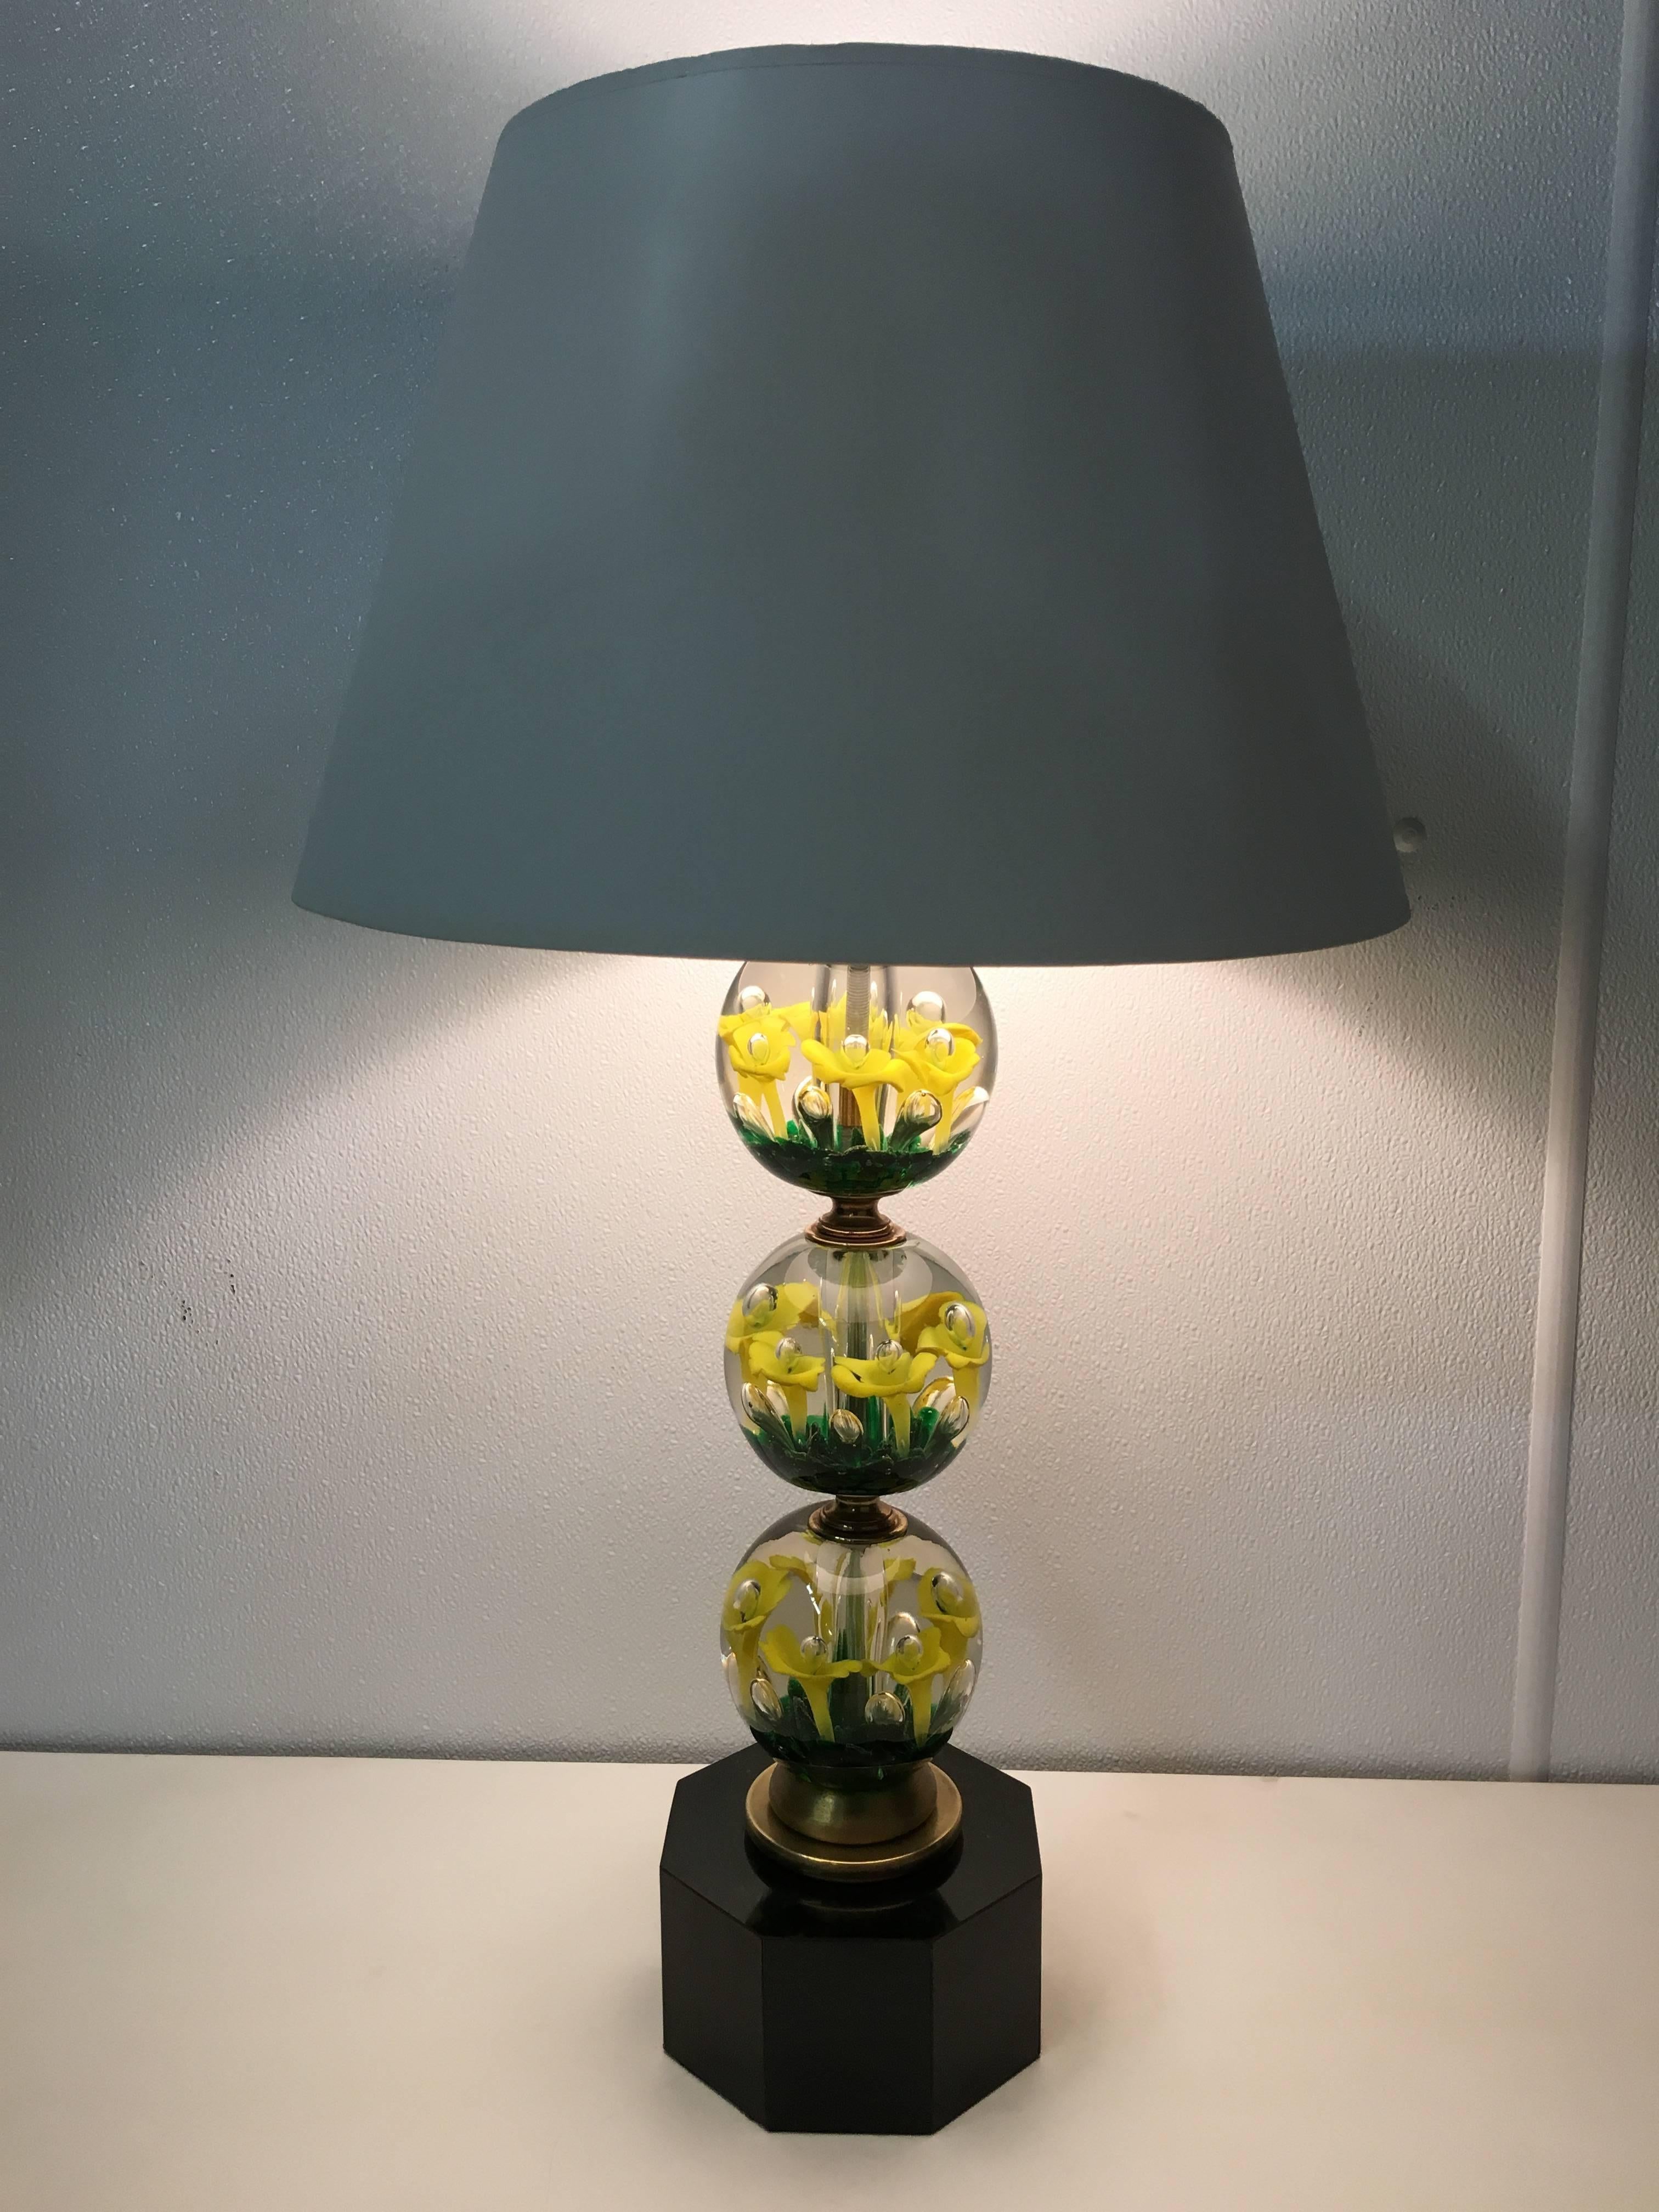 Mid-Century paperweight glass lamp by the St. Clair Glass manufacturing family of Indiana. With three tiered orbs with vibrant yellow and green flowers suspended in the glass, raised on a octagonal plinth base. 
Shade for display purposes only.